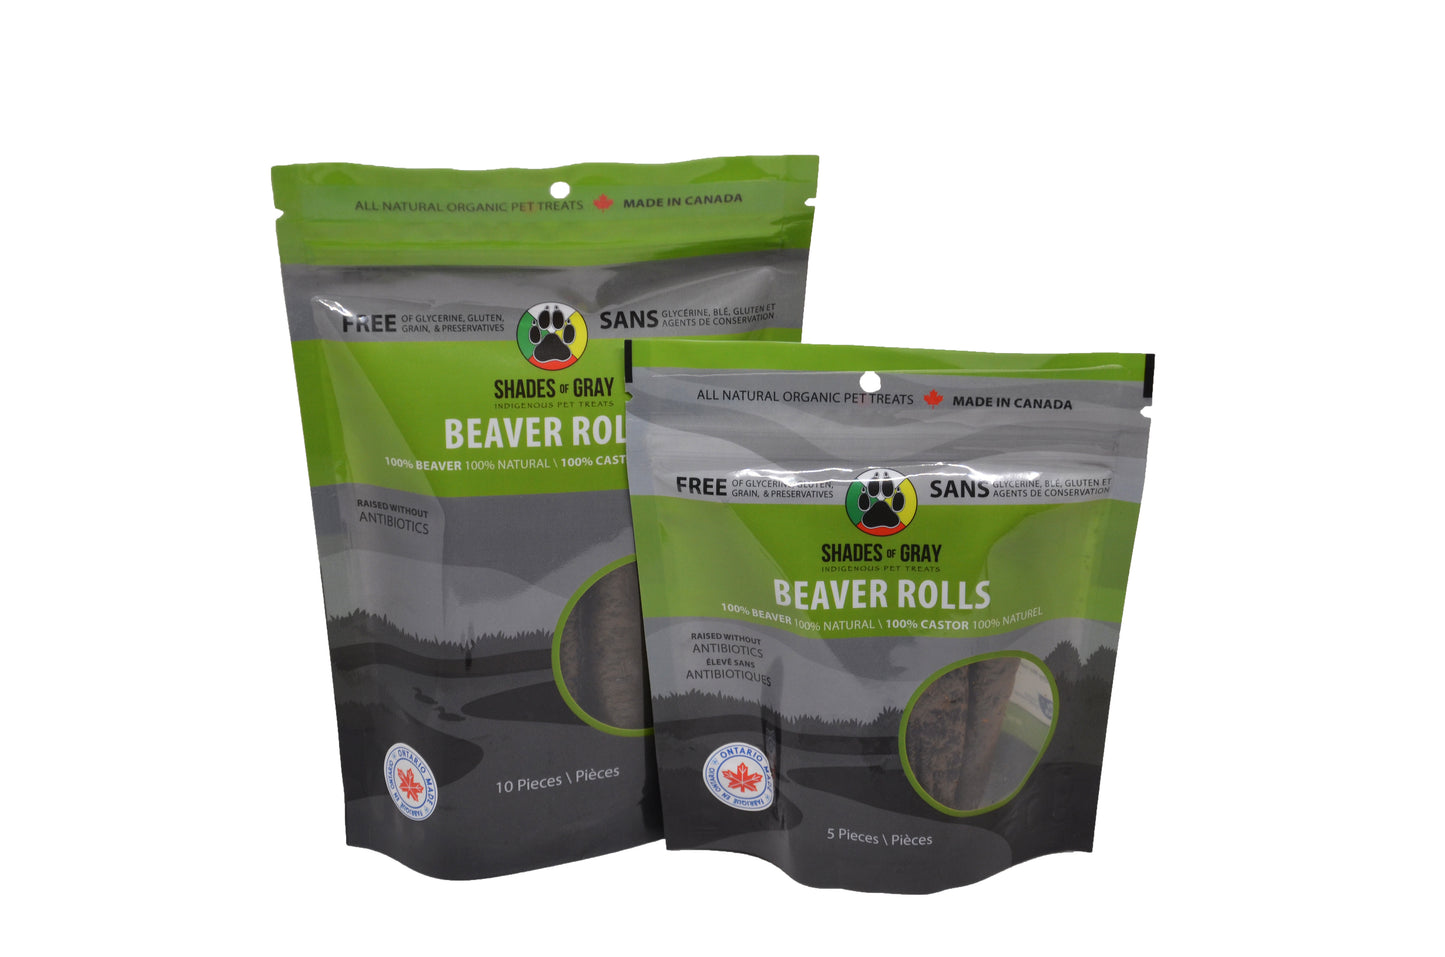 Beaver Roll Pet Treats made with organic all natural 100% beaver meat, for your cats and dogs. Free of Glycerine, Gluten, Grain & Preservatives.